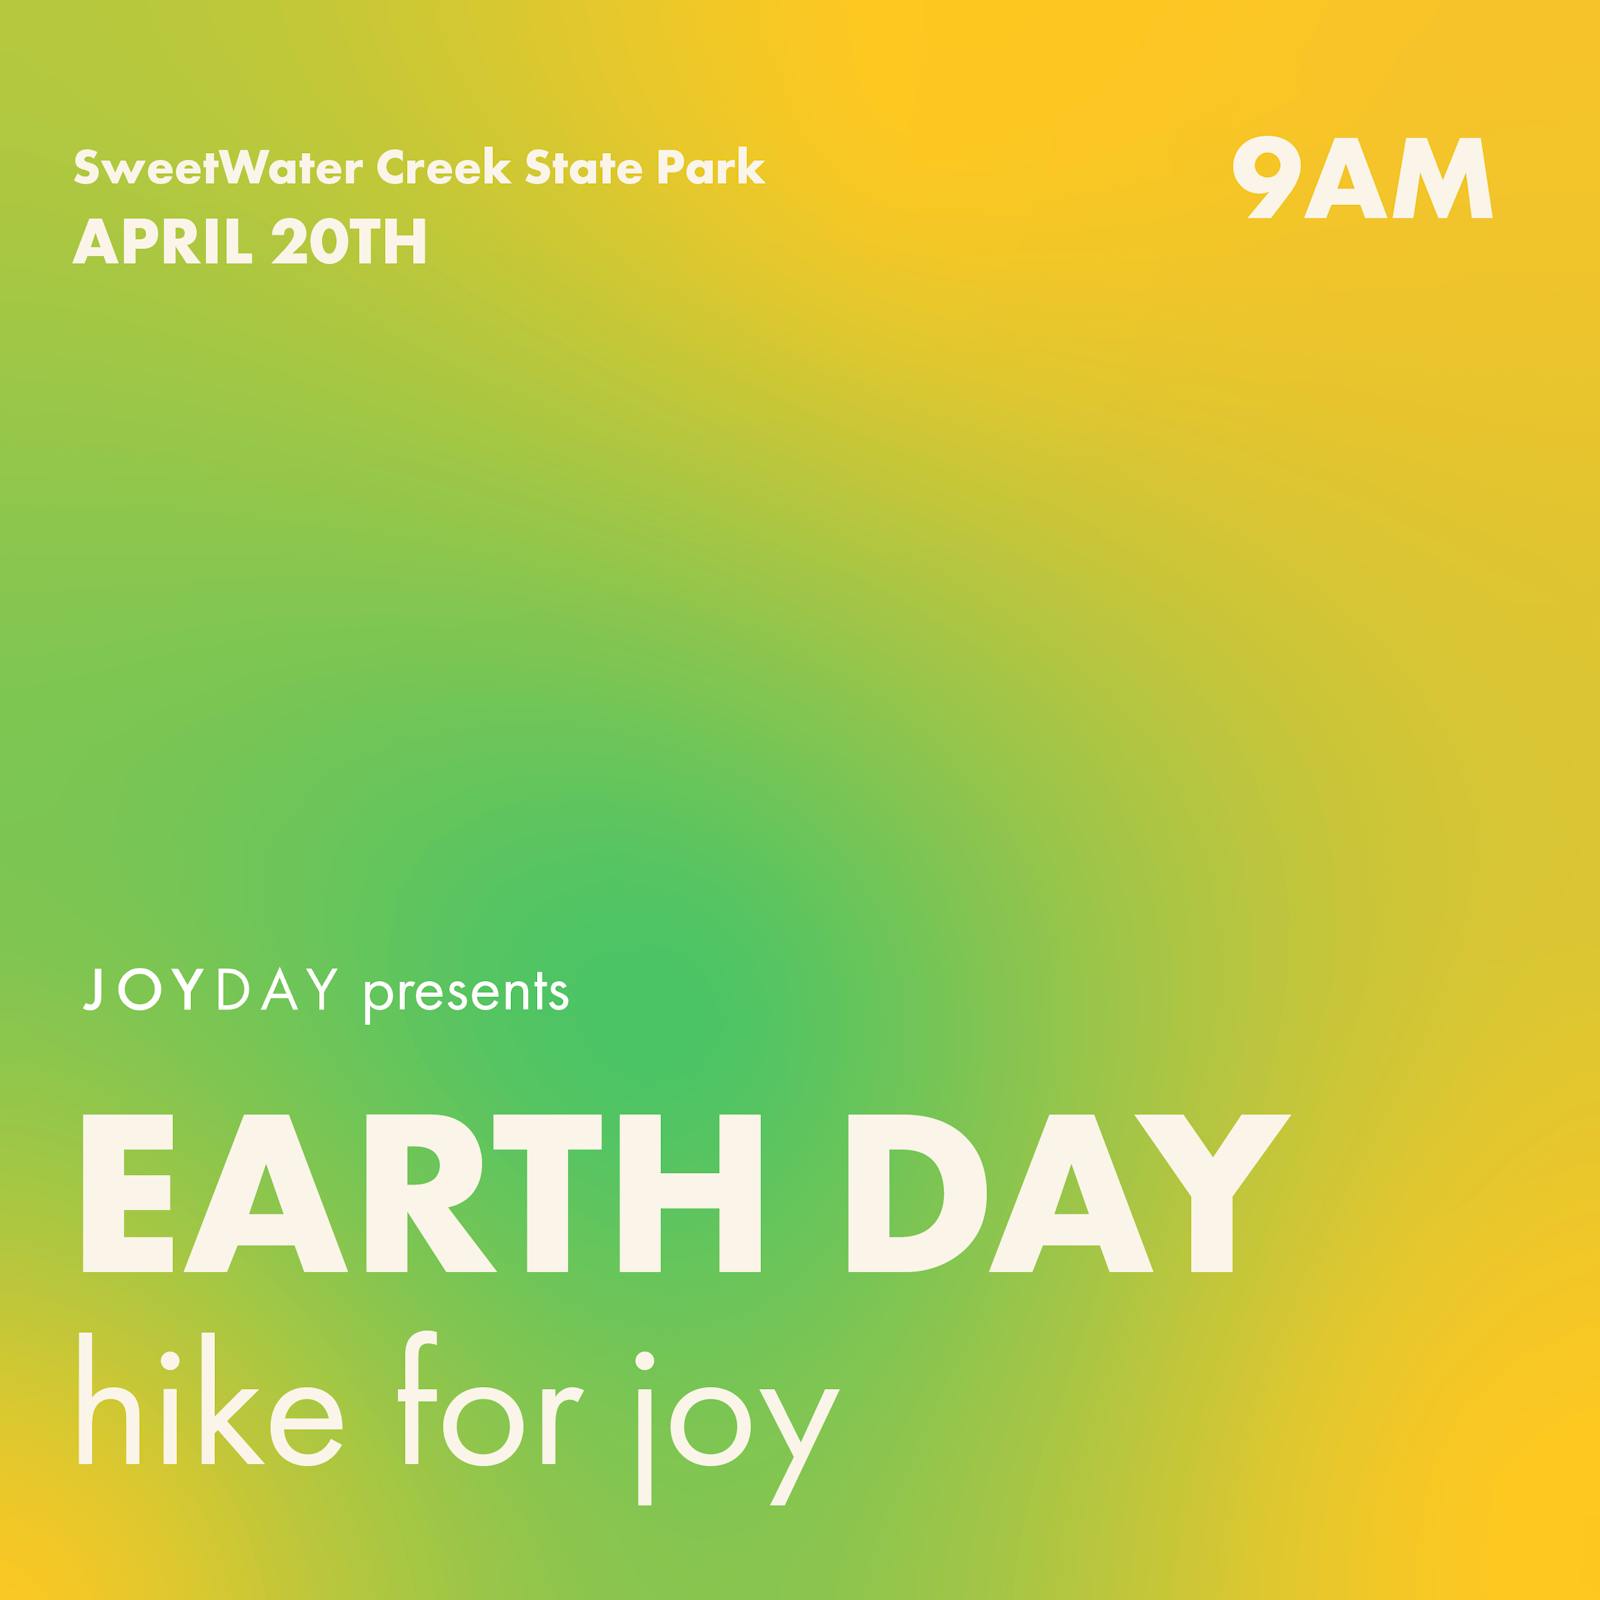 Earth Day: Hike for Joy